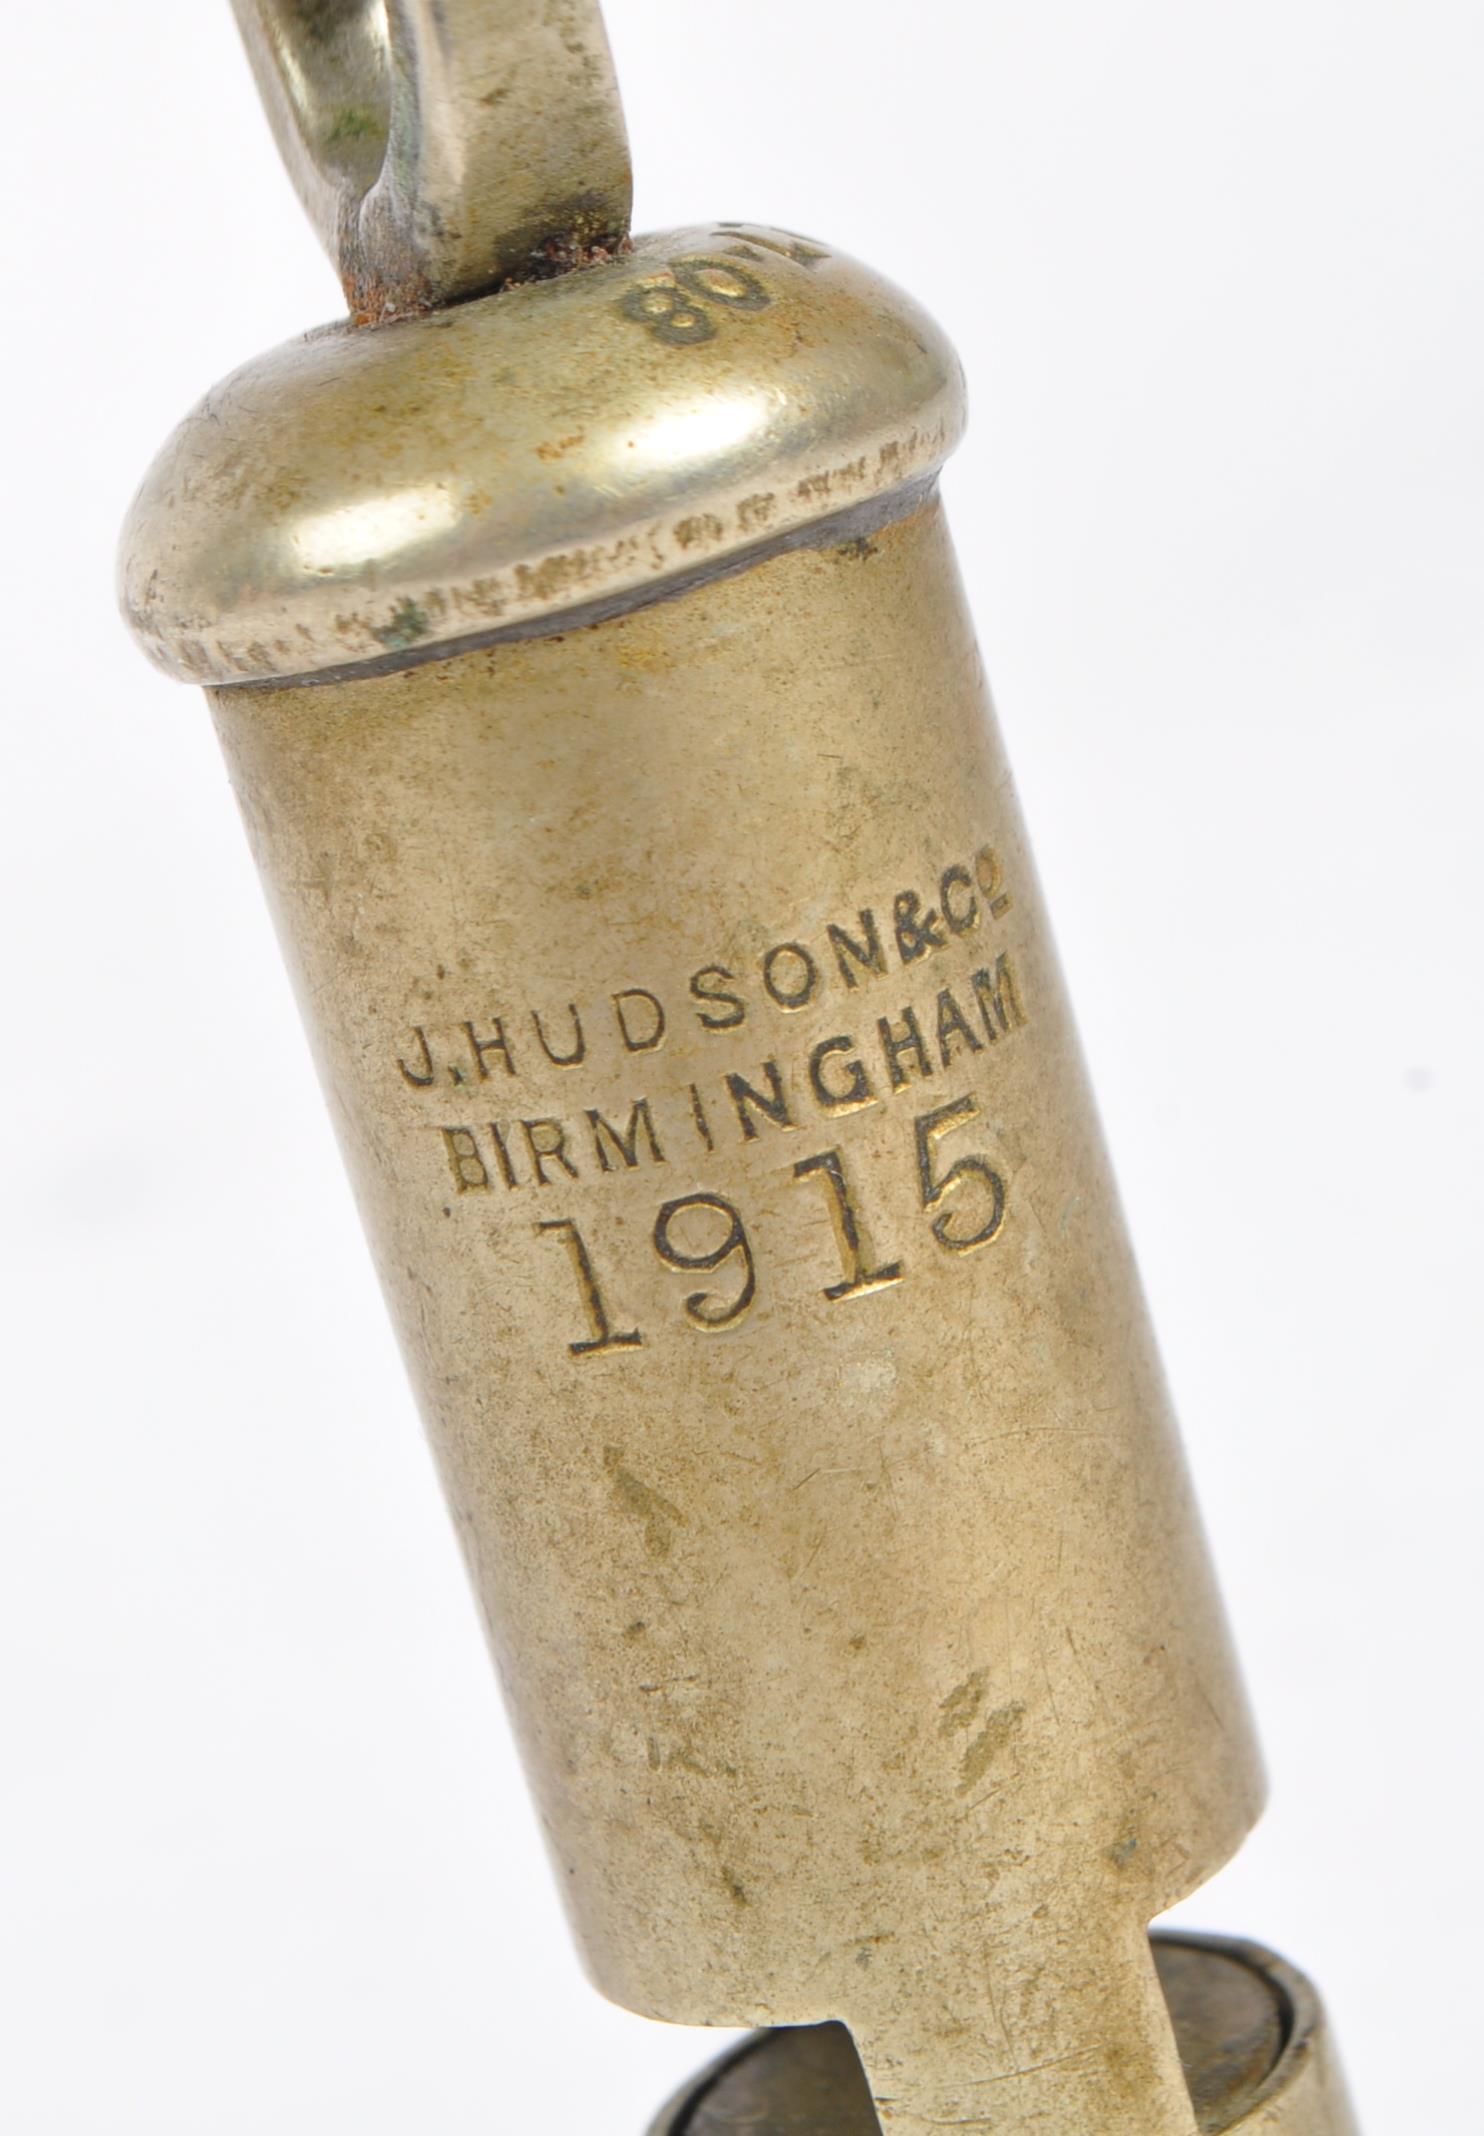 1915 POLICE WHISTLE BY J HUDSON & COMPANY BIRMINGHAM - Image 2 of 4